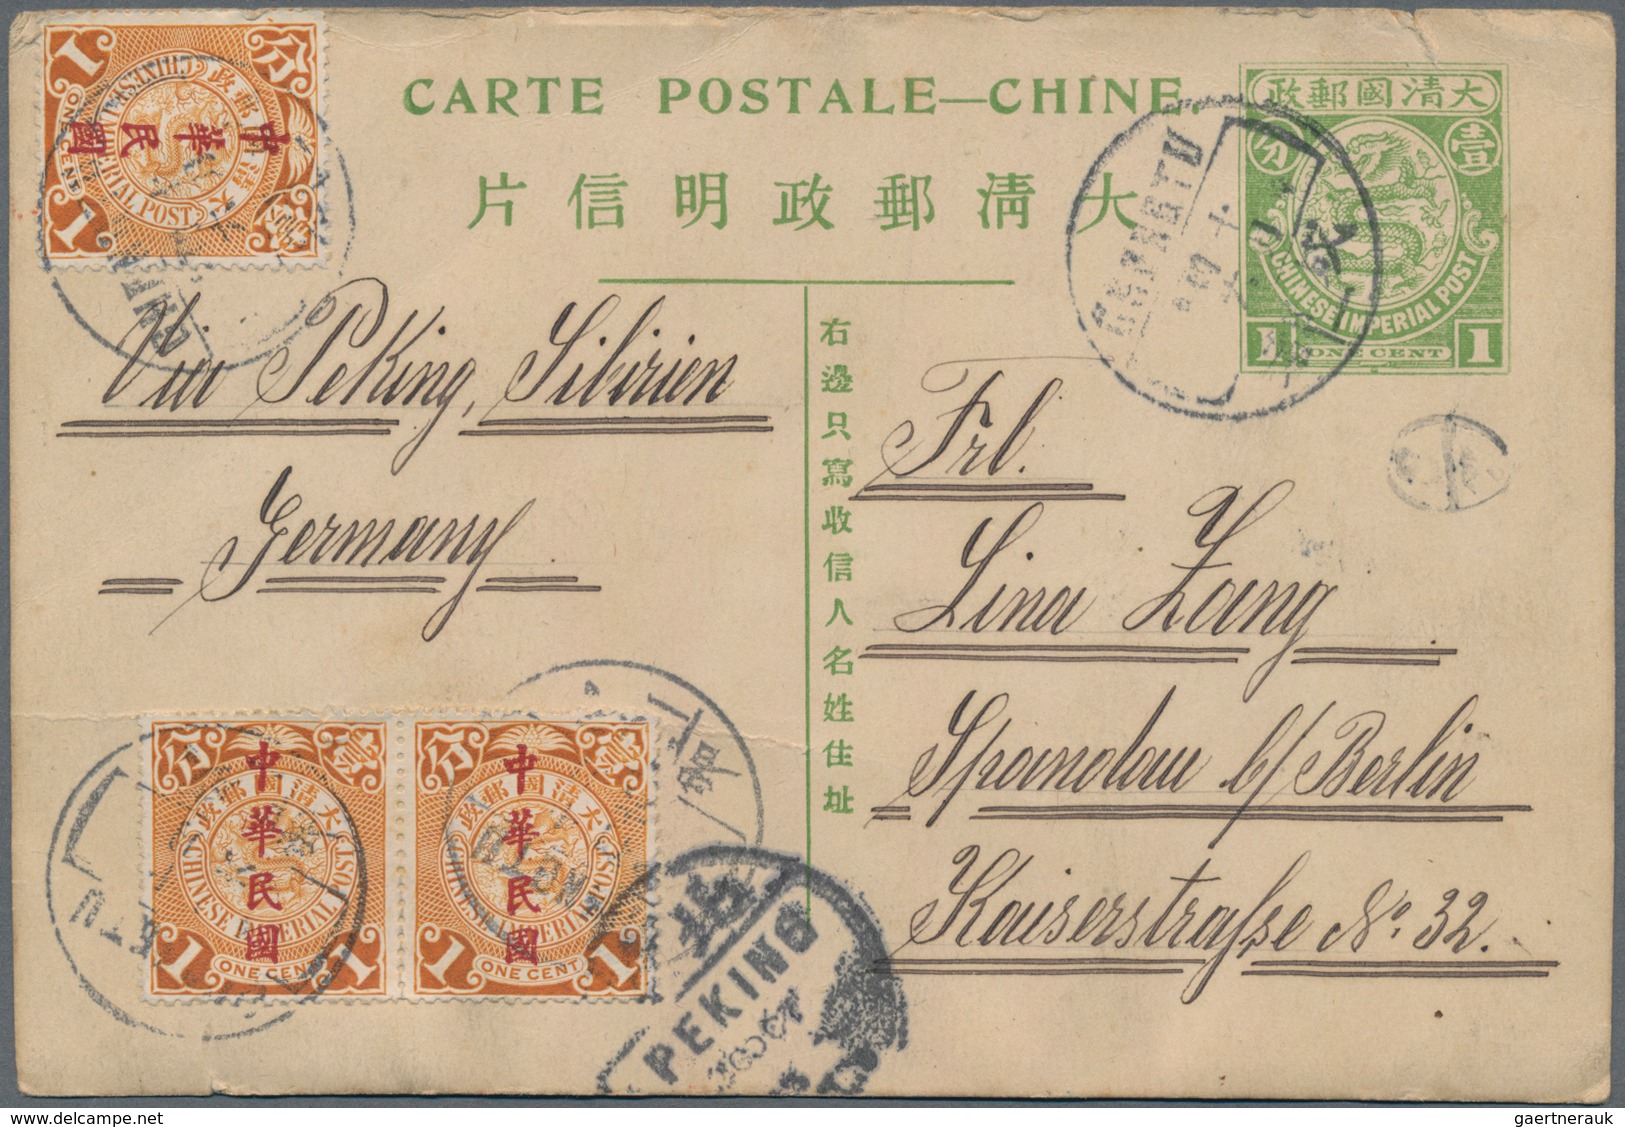 China - Ganzsachen: 1908, Card Square Dragon 1 C. Uprated Waterlow Ovpt. 1 C. (3 Inc. Pair) Canc. Bo - Cartes Postales